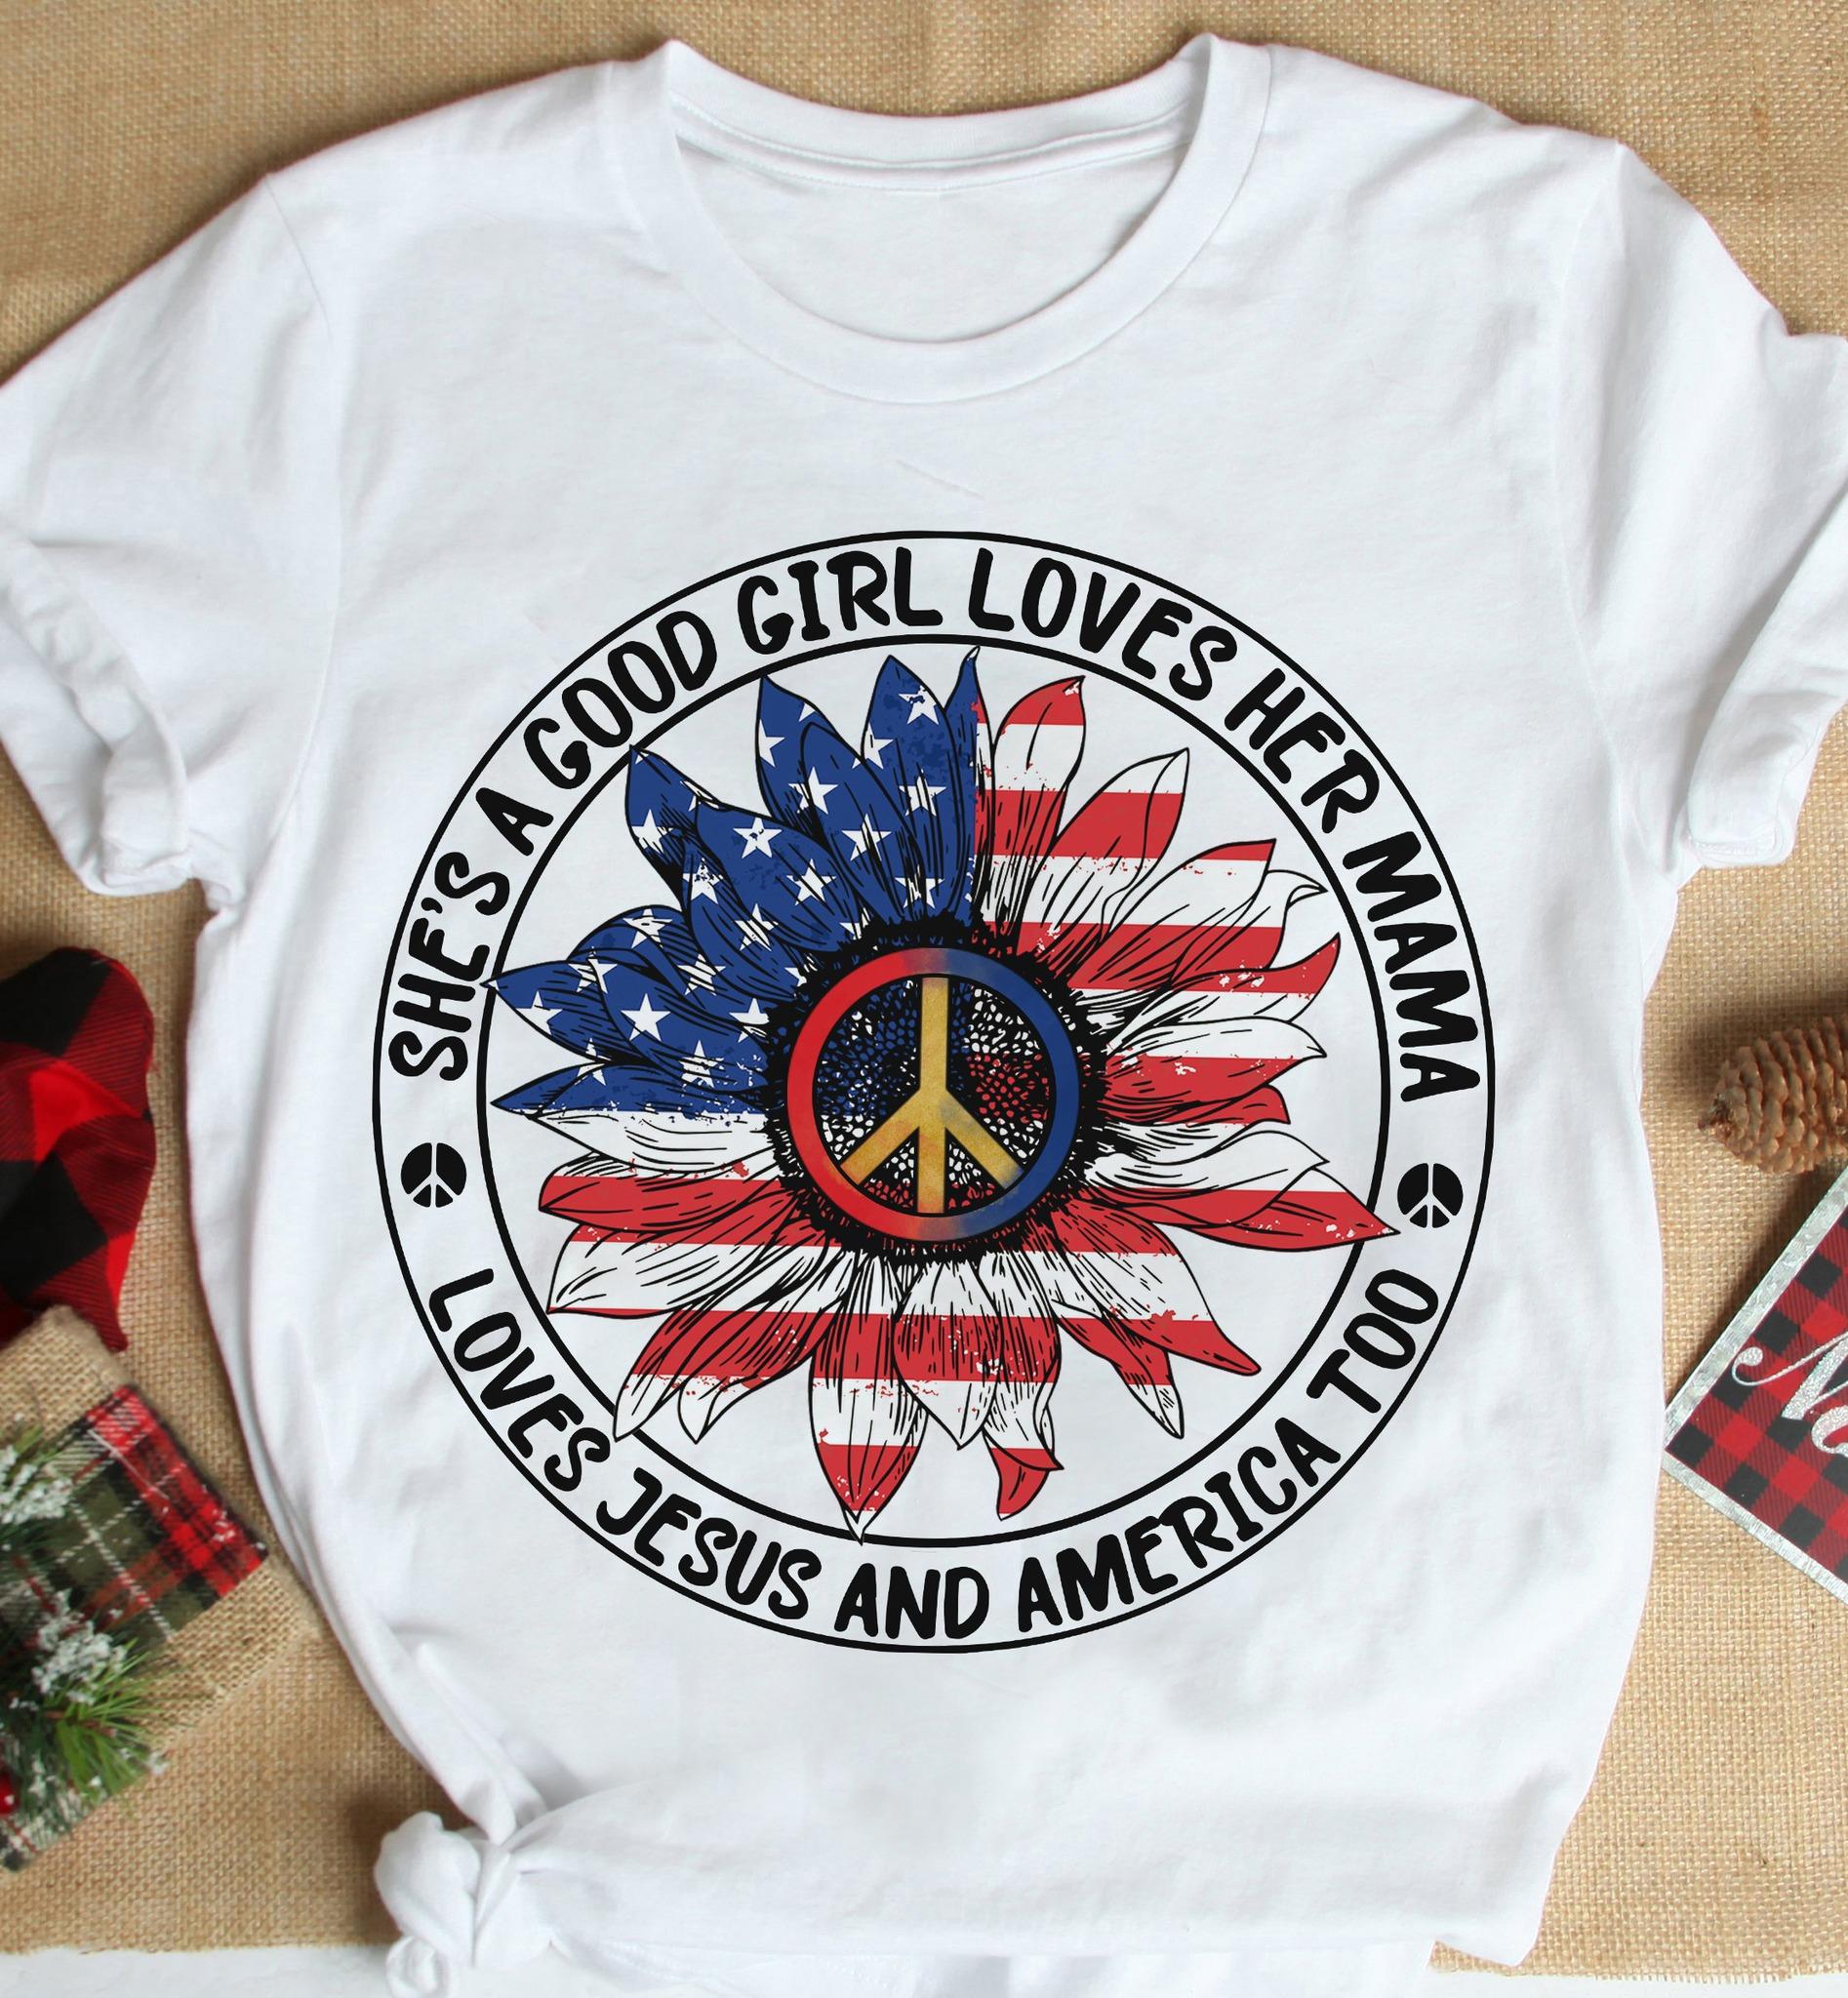 America Flower Peace Hippie - She's a good girl loves her mama loves jesus and america too